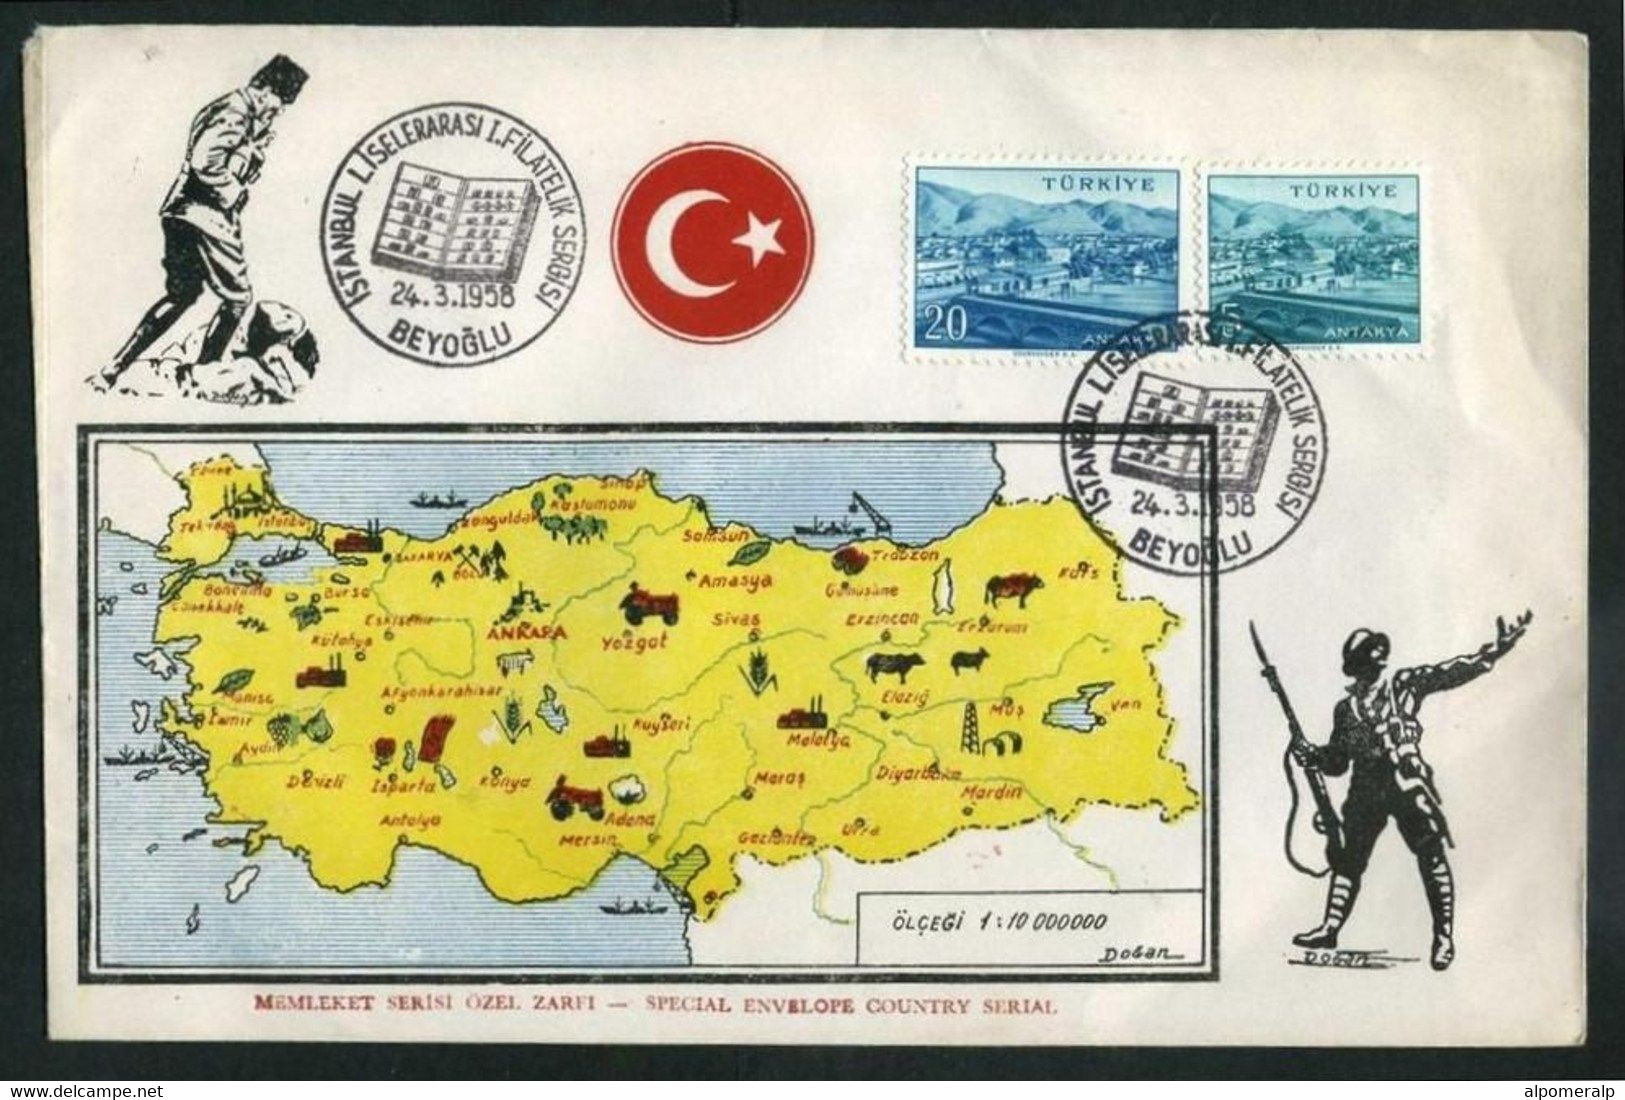 Turkey 1958 Philatelic Exhibition | Map And Flag Of Turkey | Soldier With Bayonet Rifle, Mar.24 | Special Postmark - Lettres & Documents